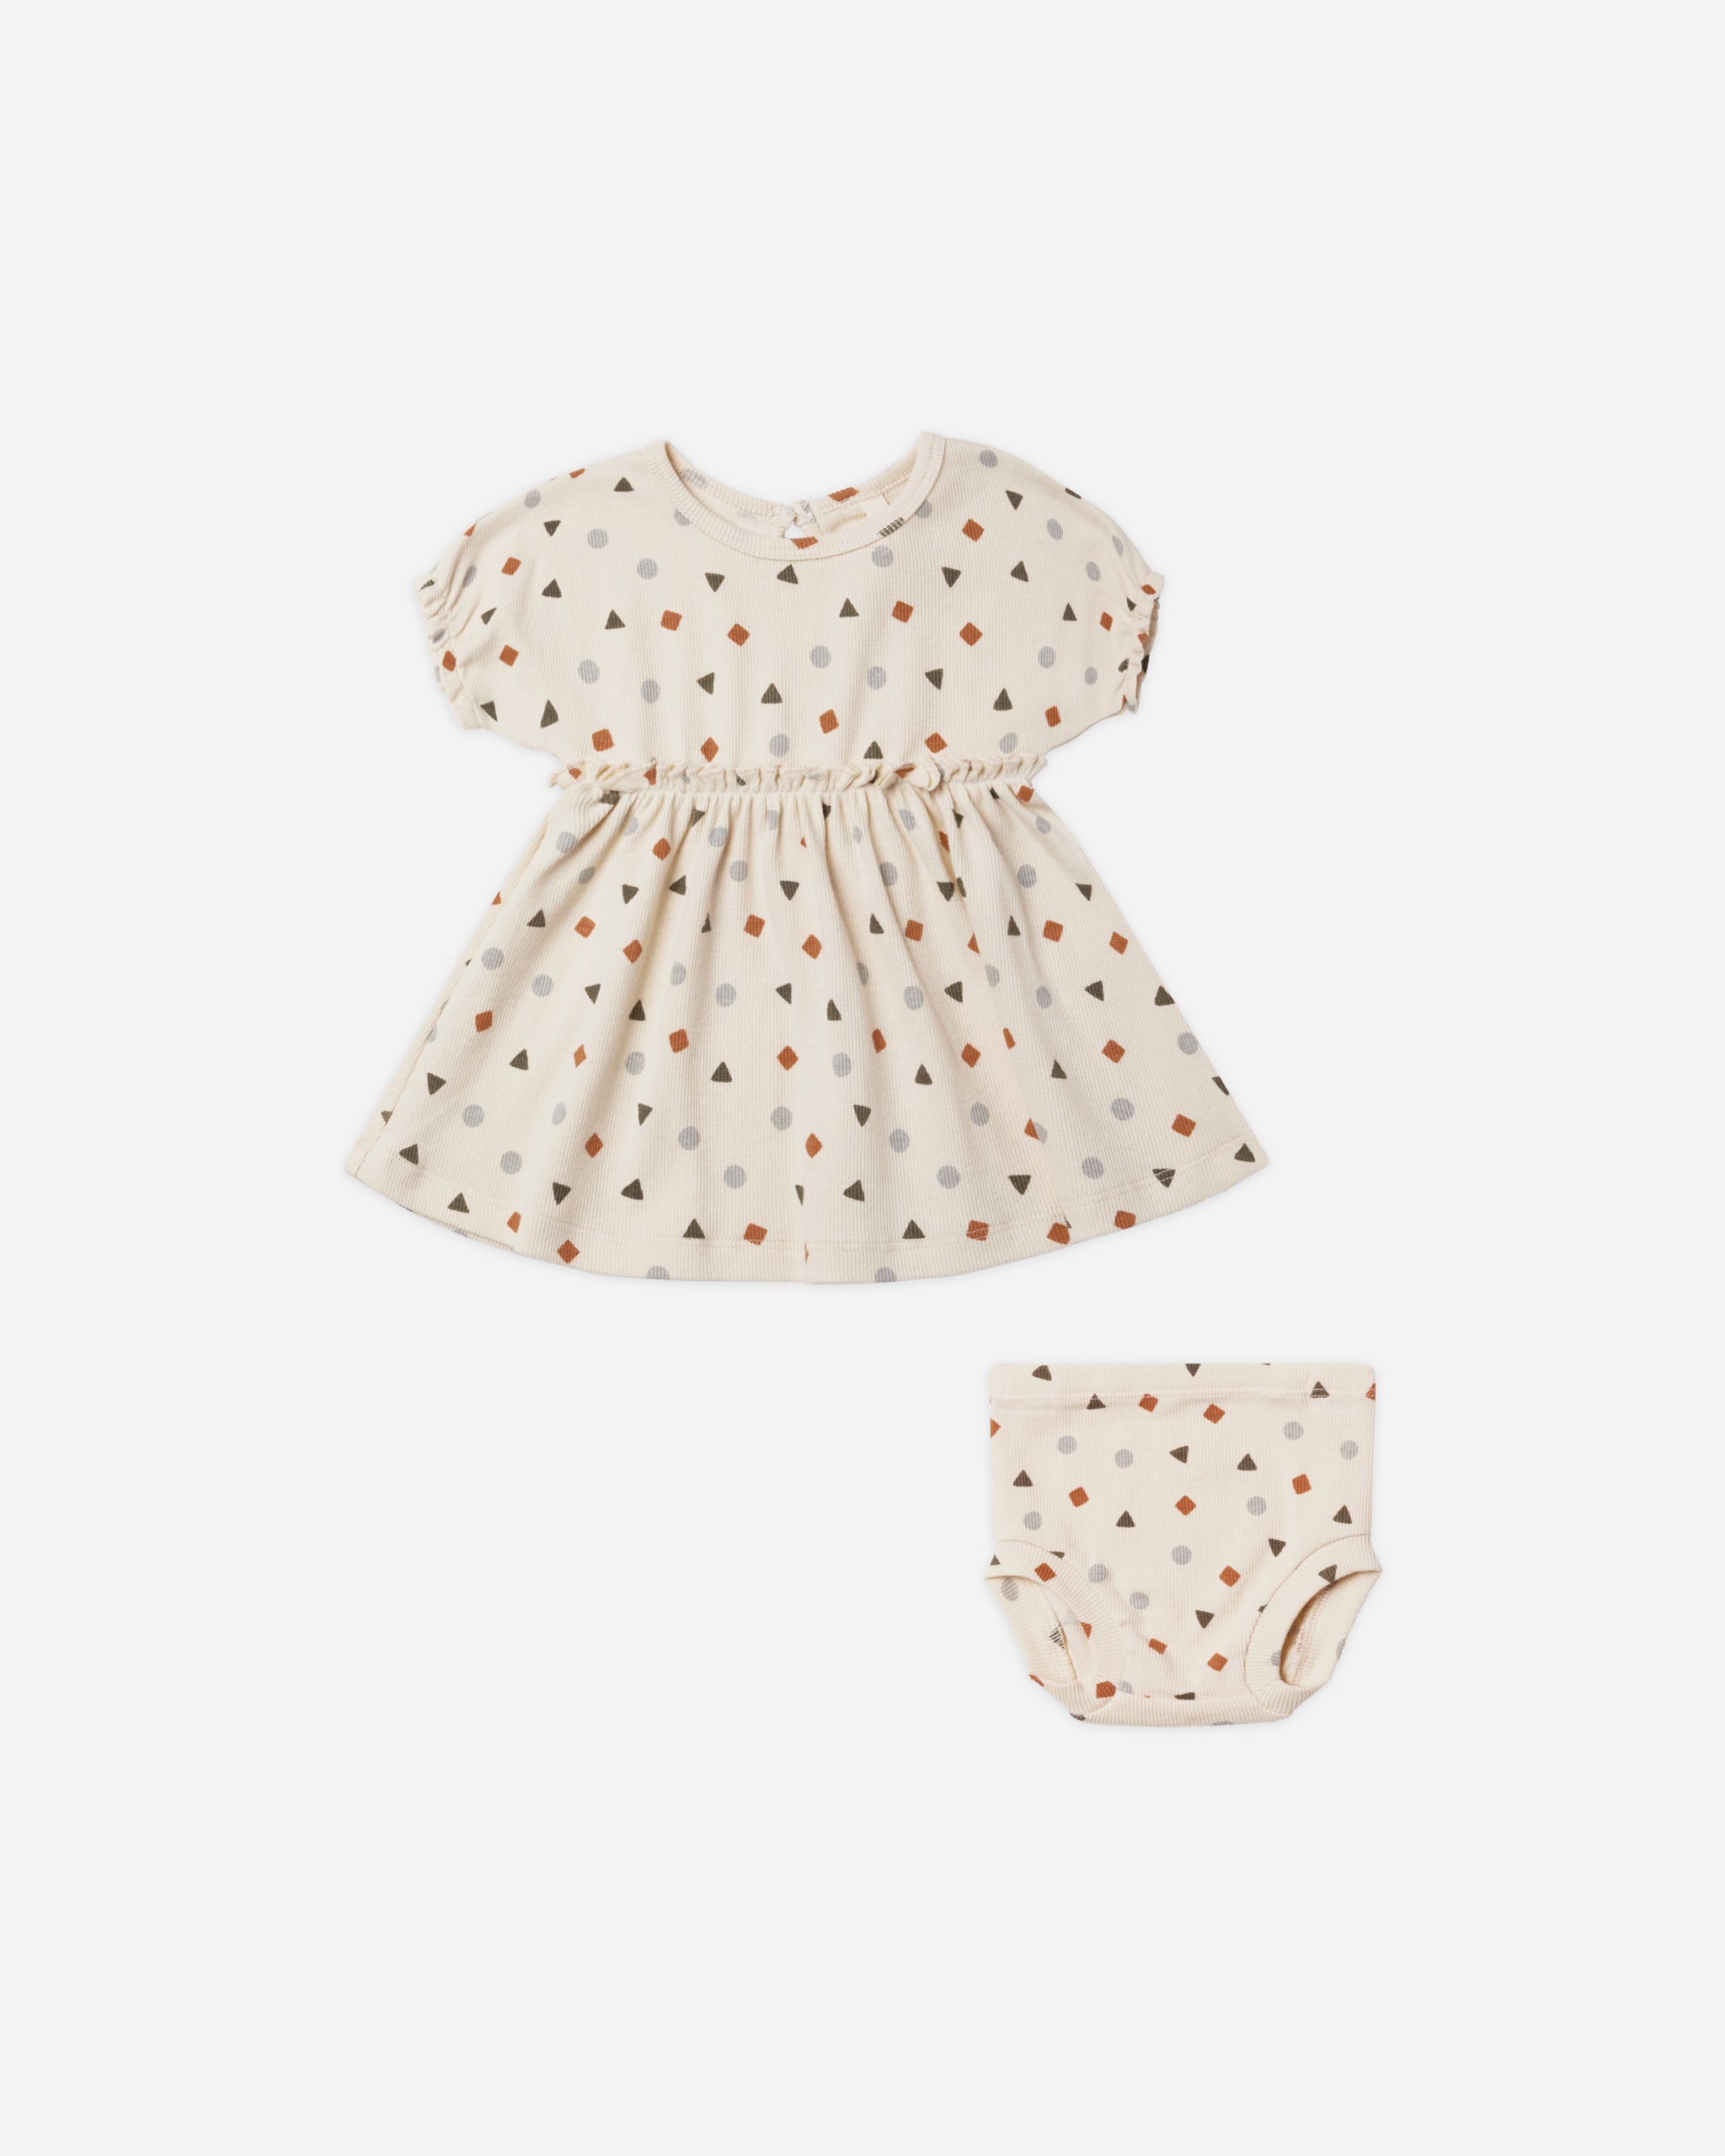 Annie Dress || Geo - Rylee + Cru | Kids Clothes | Trendy Baby Clothes | Modern Infant Outfits |